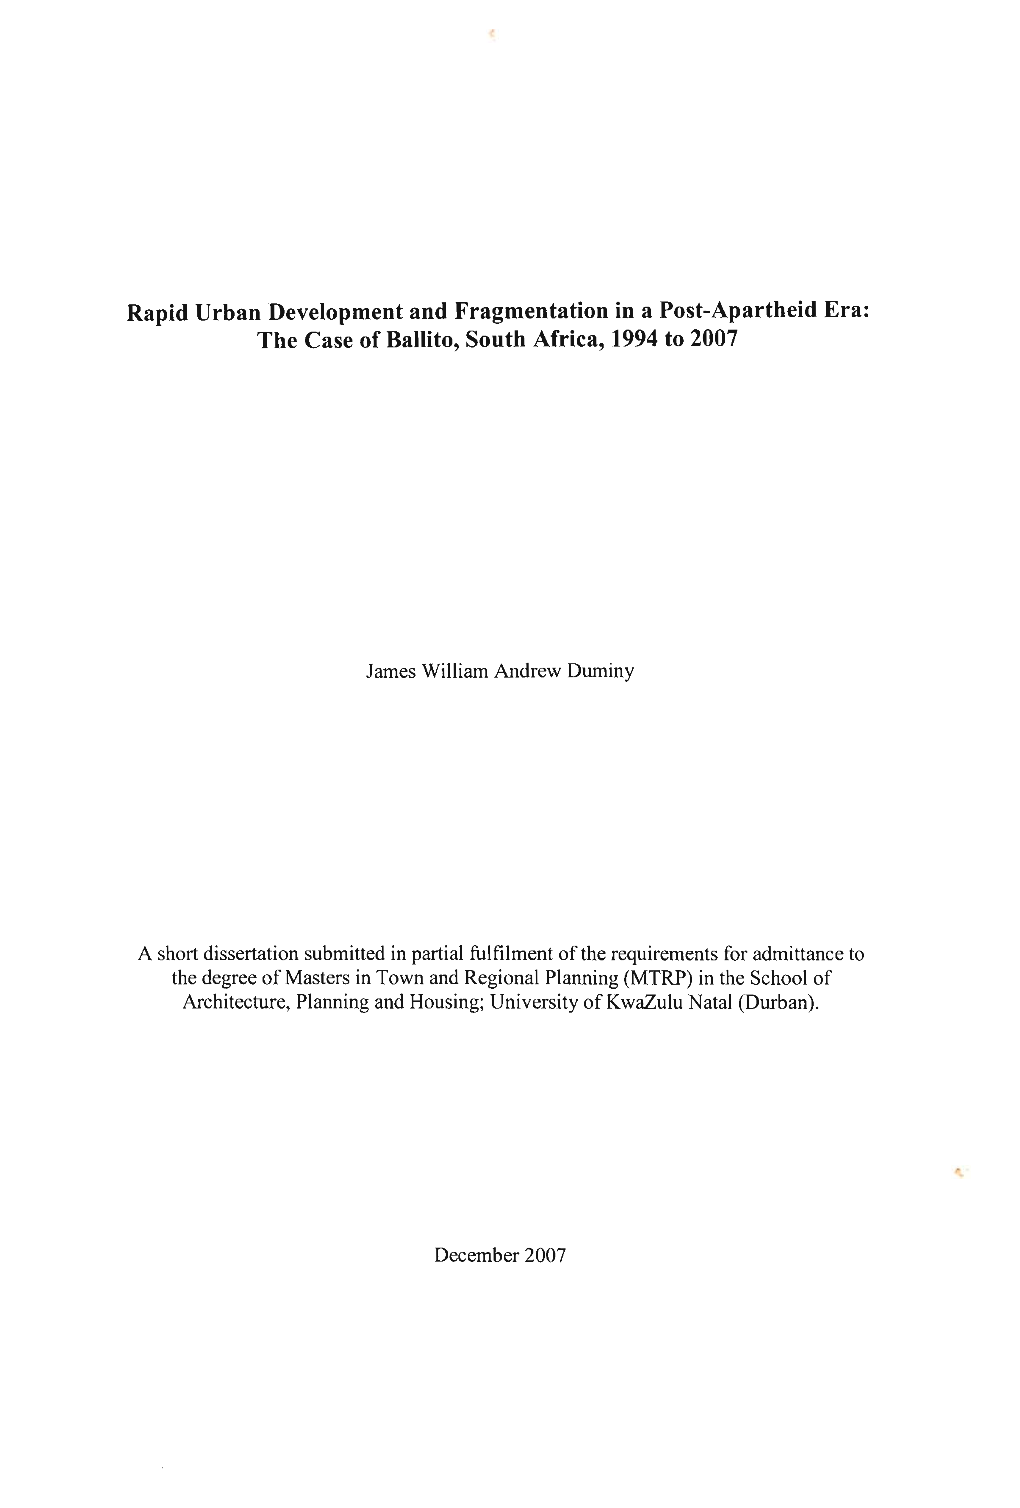 Rapid Urban Development and Fragmentation in a Post-Apartheid Era: the Case of Ballito, South Africa, 1994 to 2007